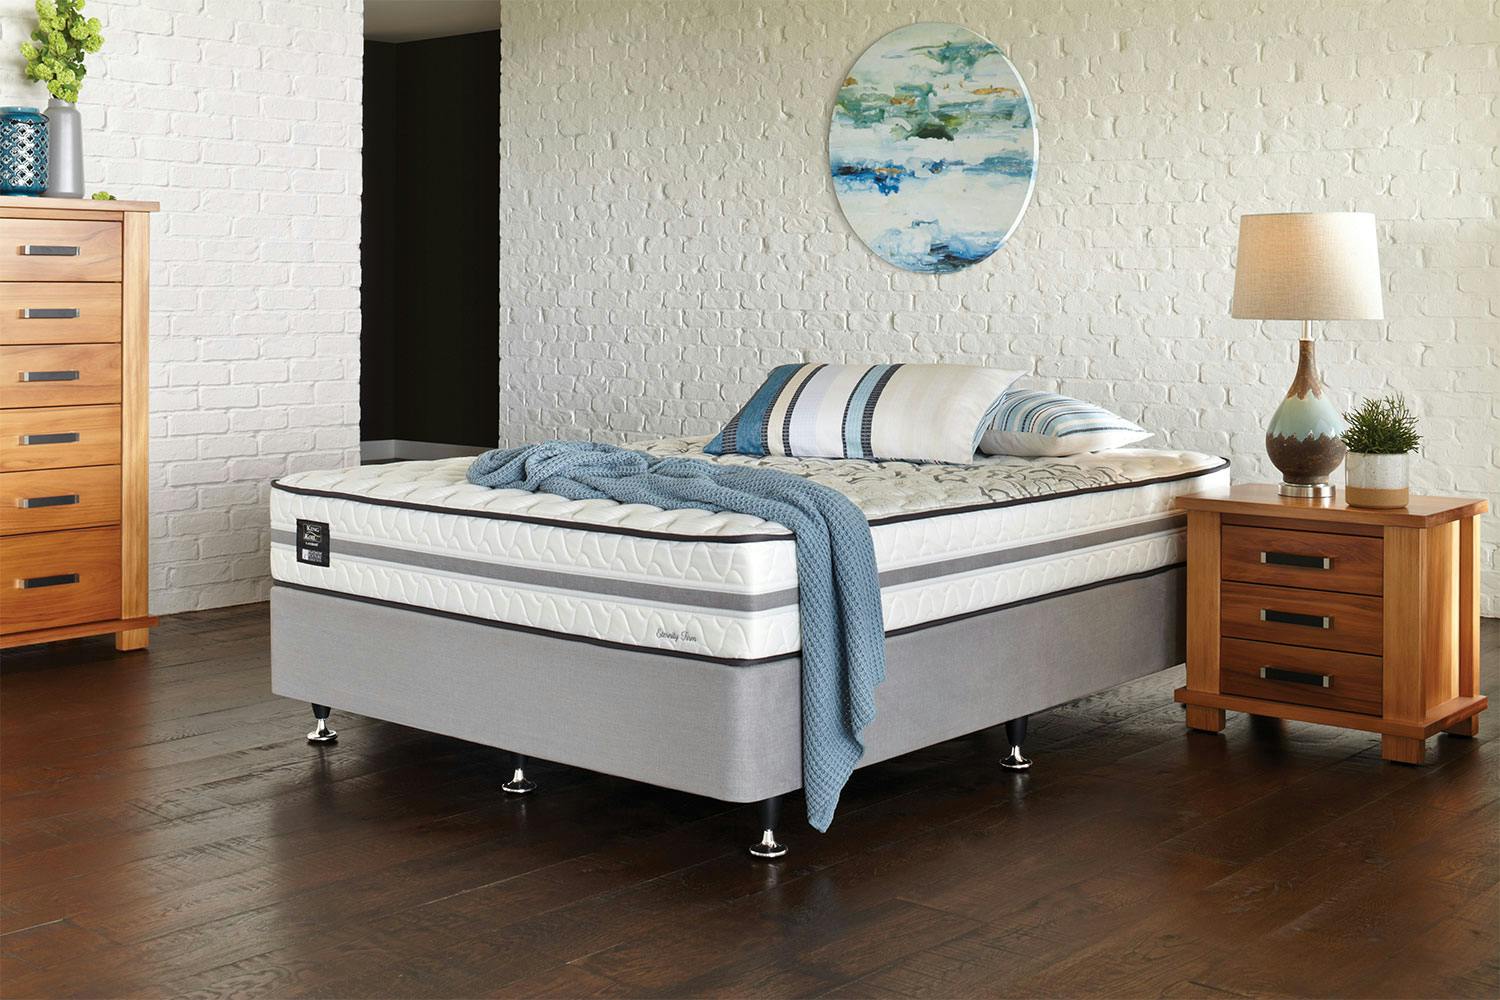 king koil double bed mattress